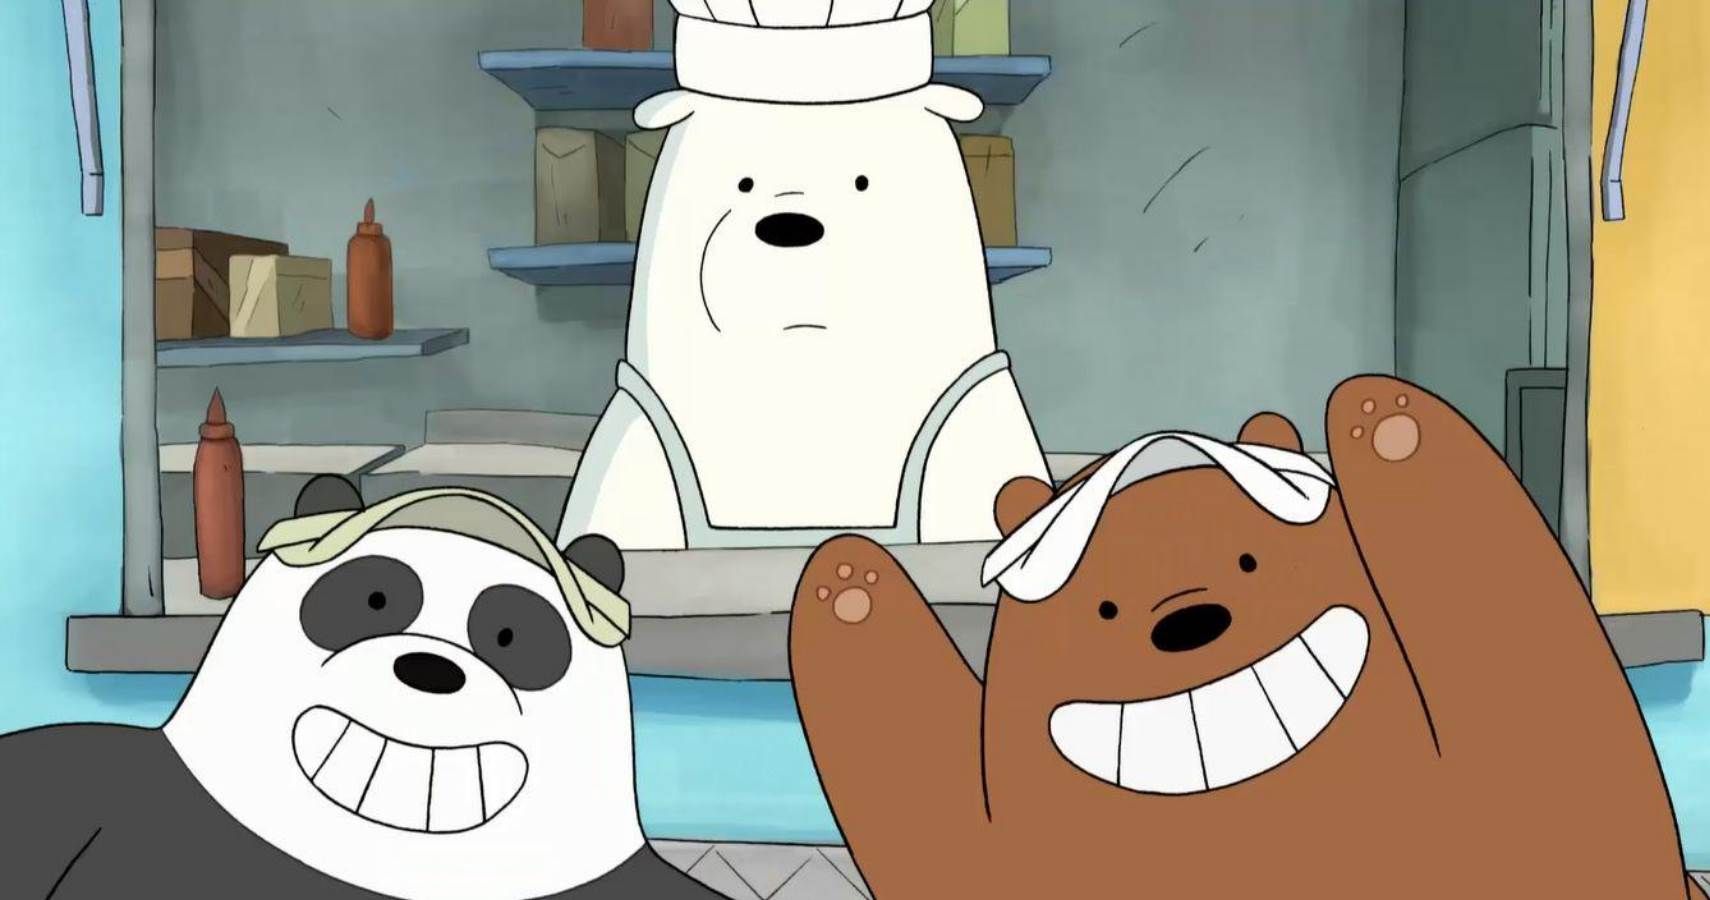 The Bears from We Bare Bears.